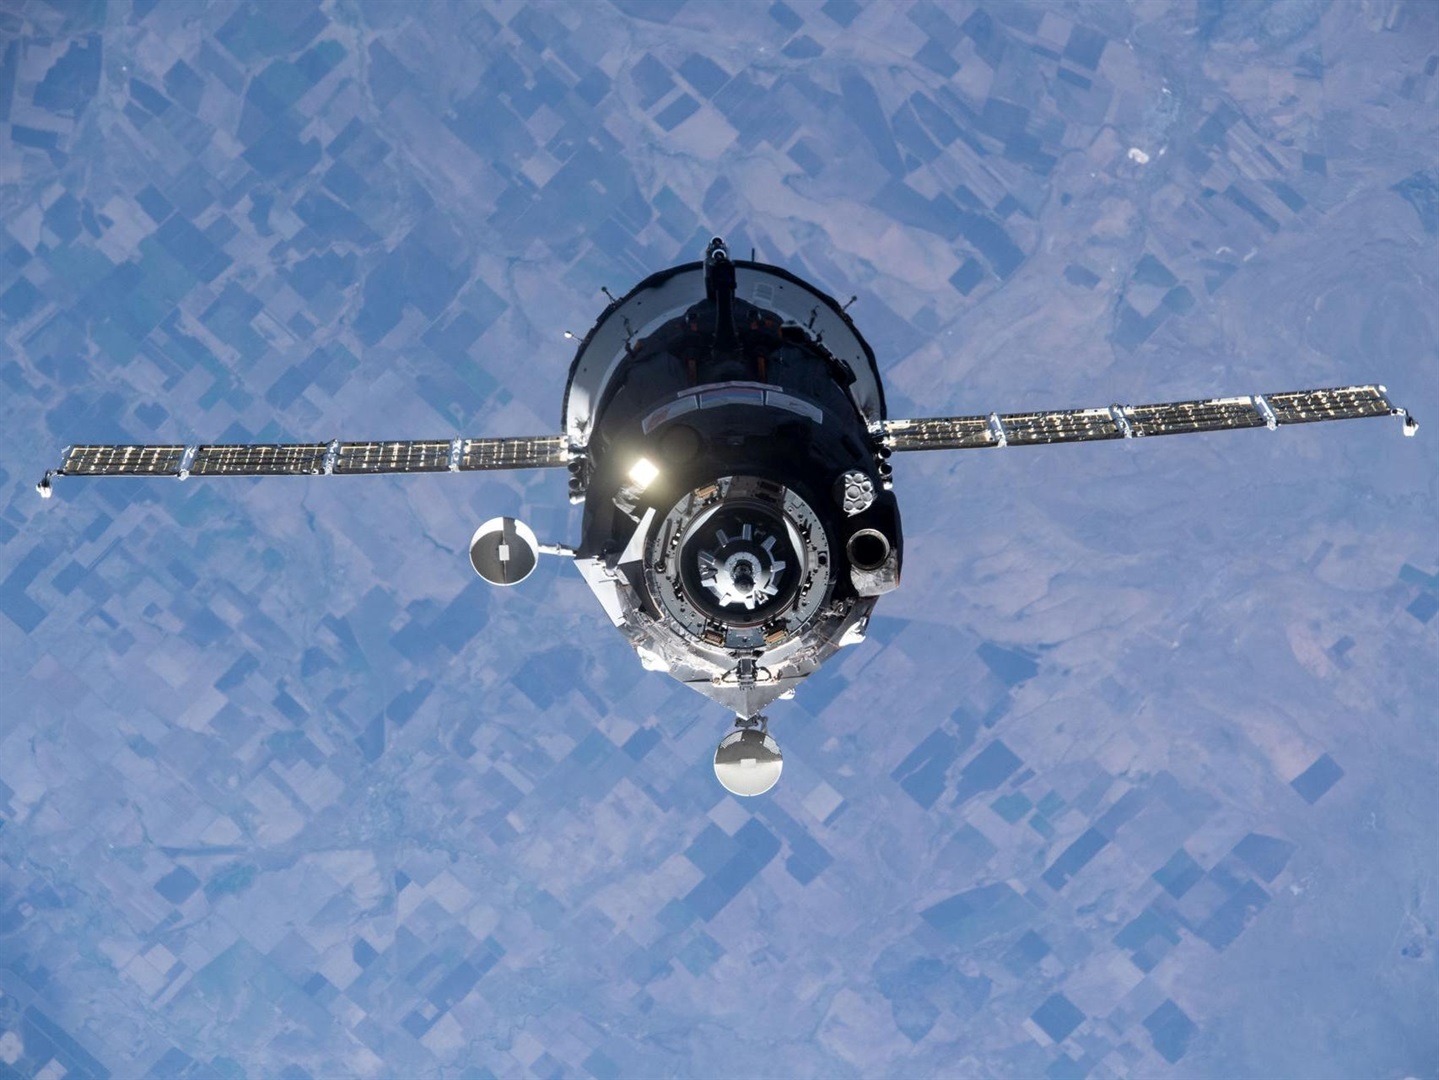 A Soyuz spaceship carrying a Russian film crew and a cosmonaut approaches the International Space Station, on October 5, 2021.